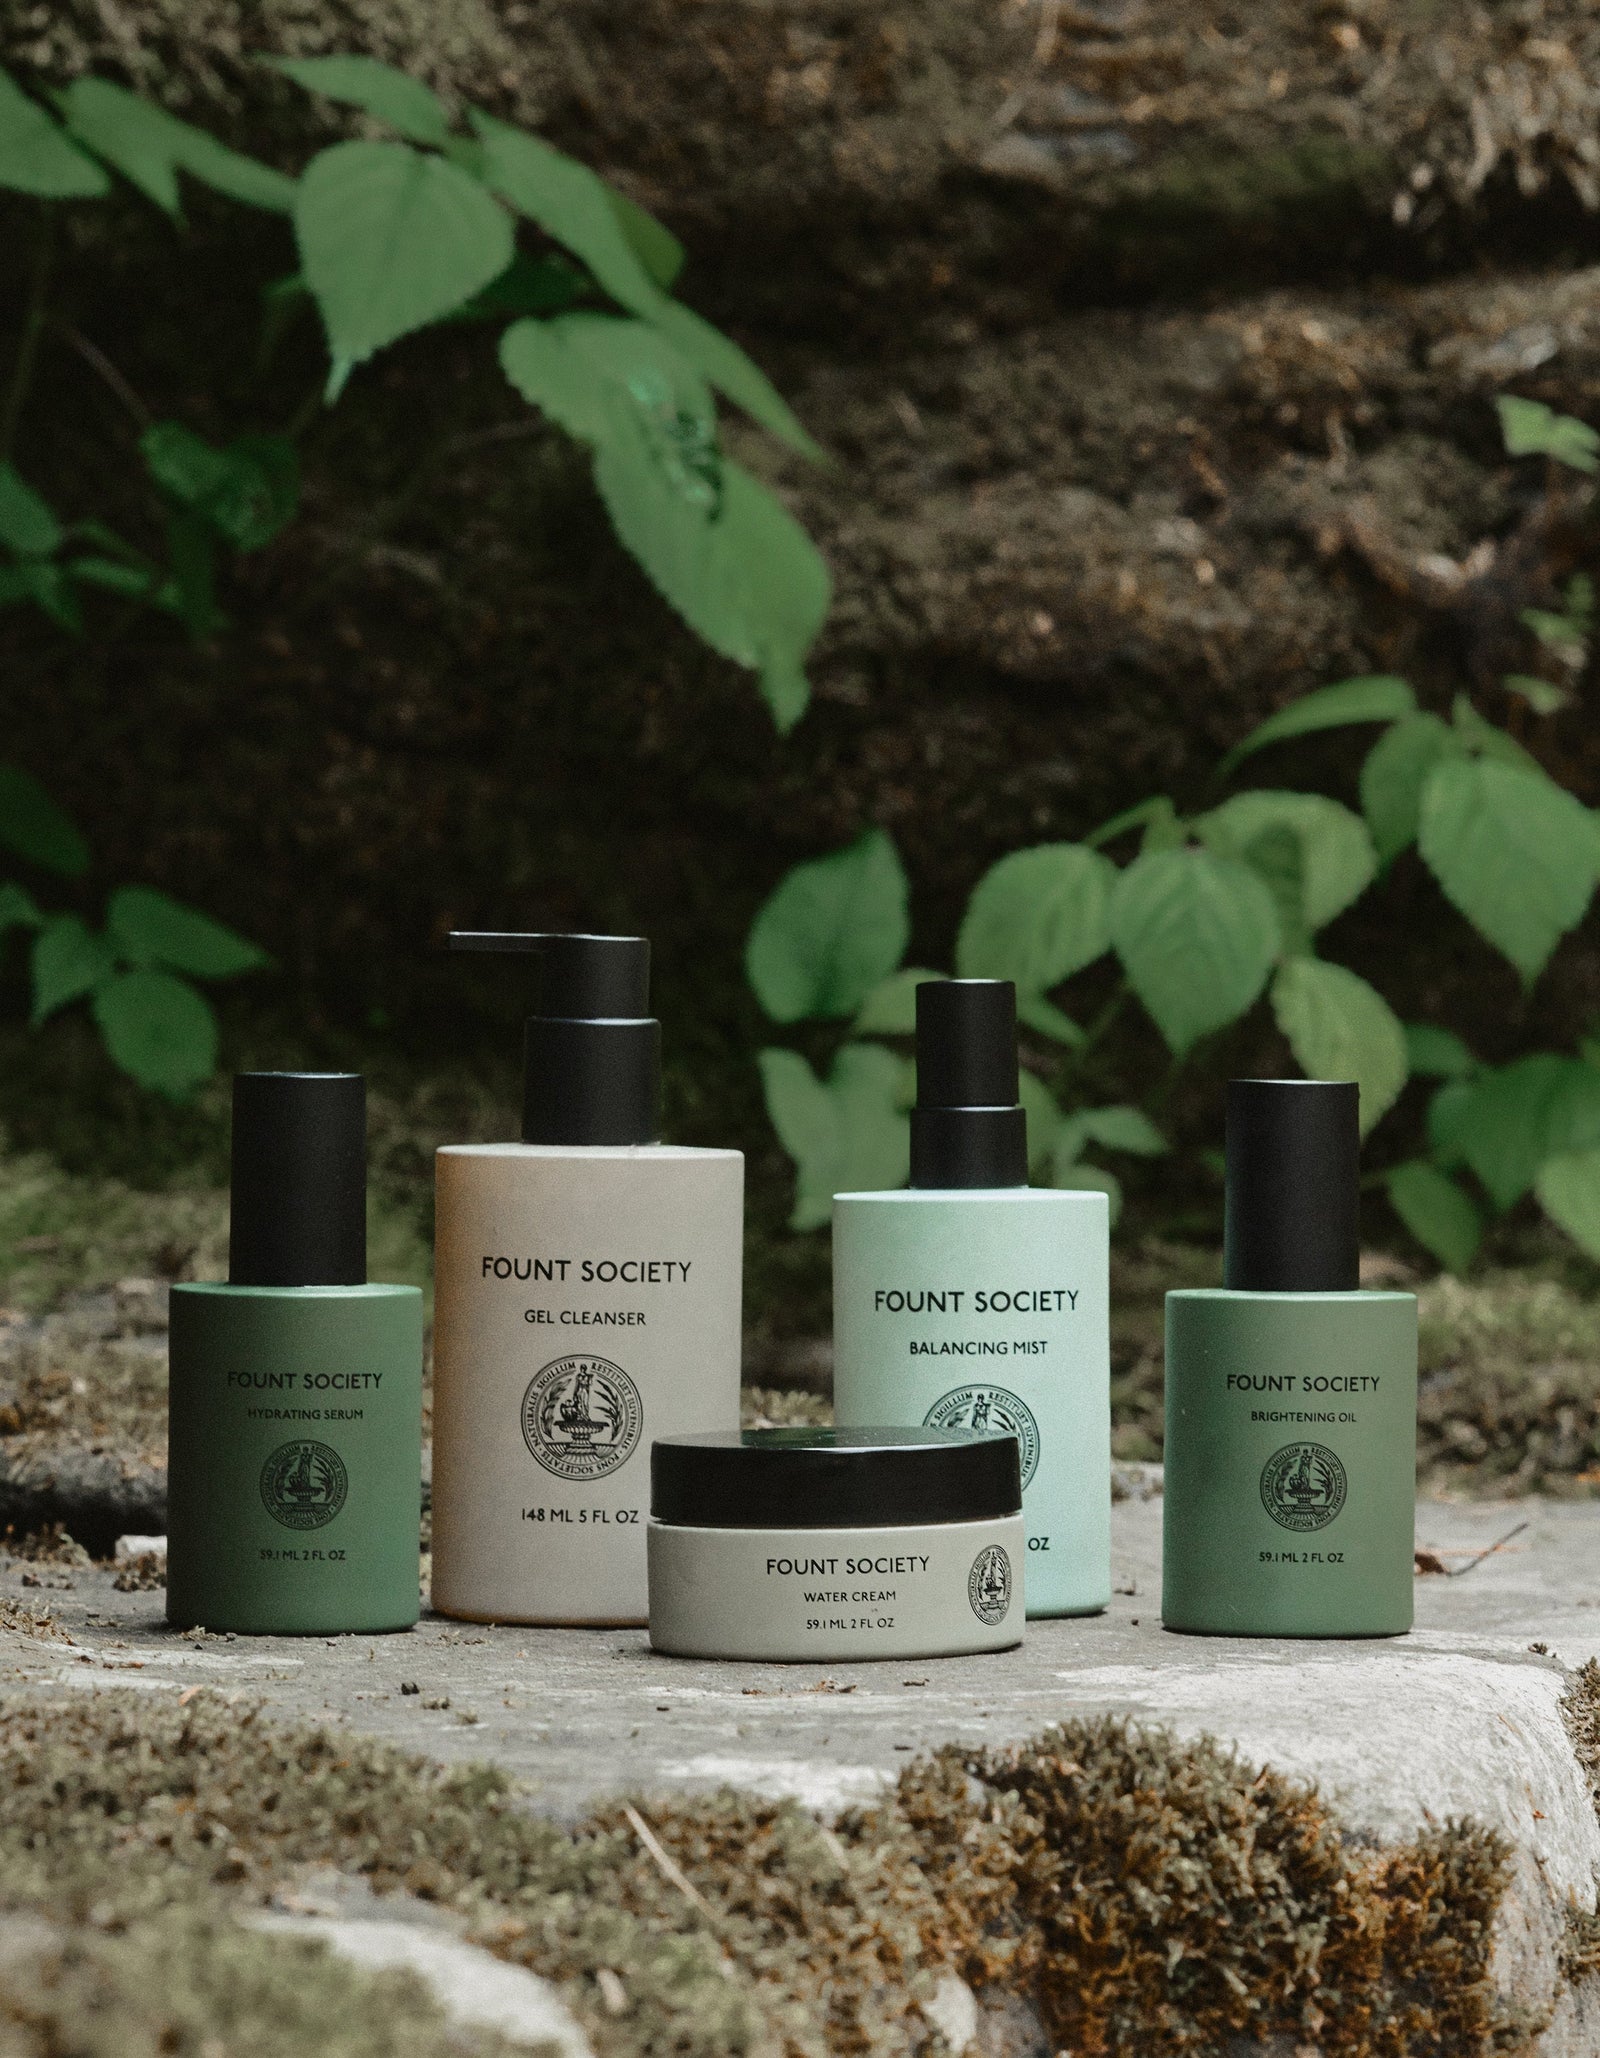 Five skincare products from Cozy Earth's "The Routine" collection are elegantly displayed outdoors on a rocky surface with lush green foliage in the background. The collection includes a gel cleanser, balancing mist, and various creams, all presented in minimalist, earth-toned packaging.